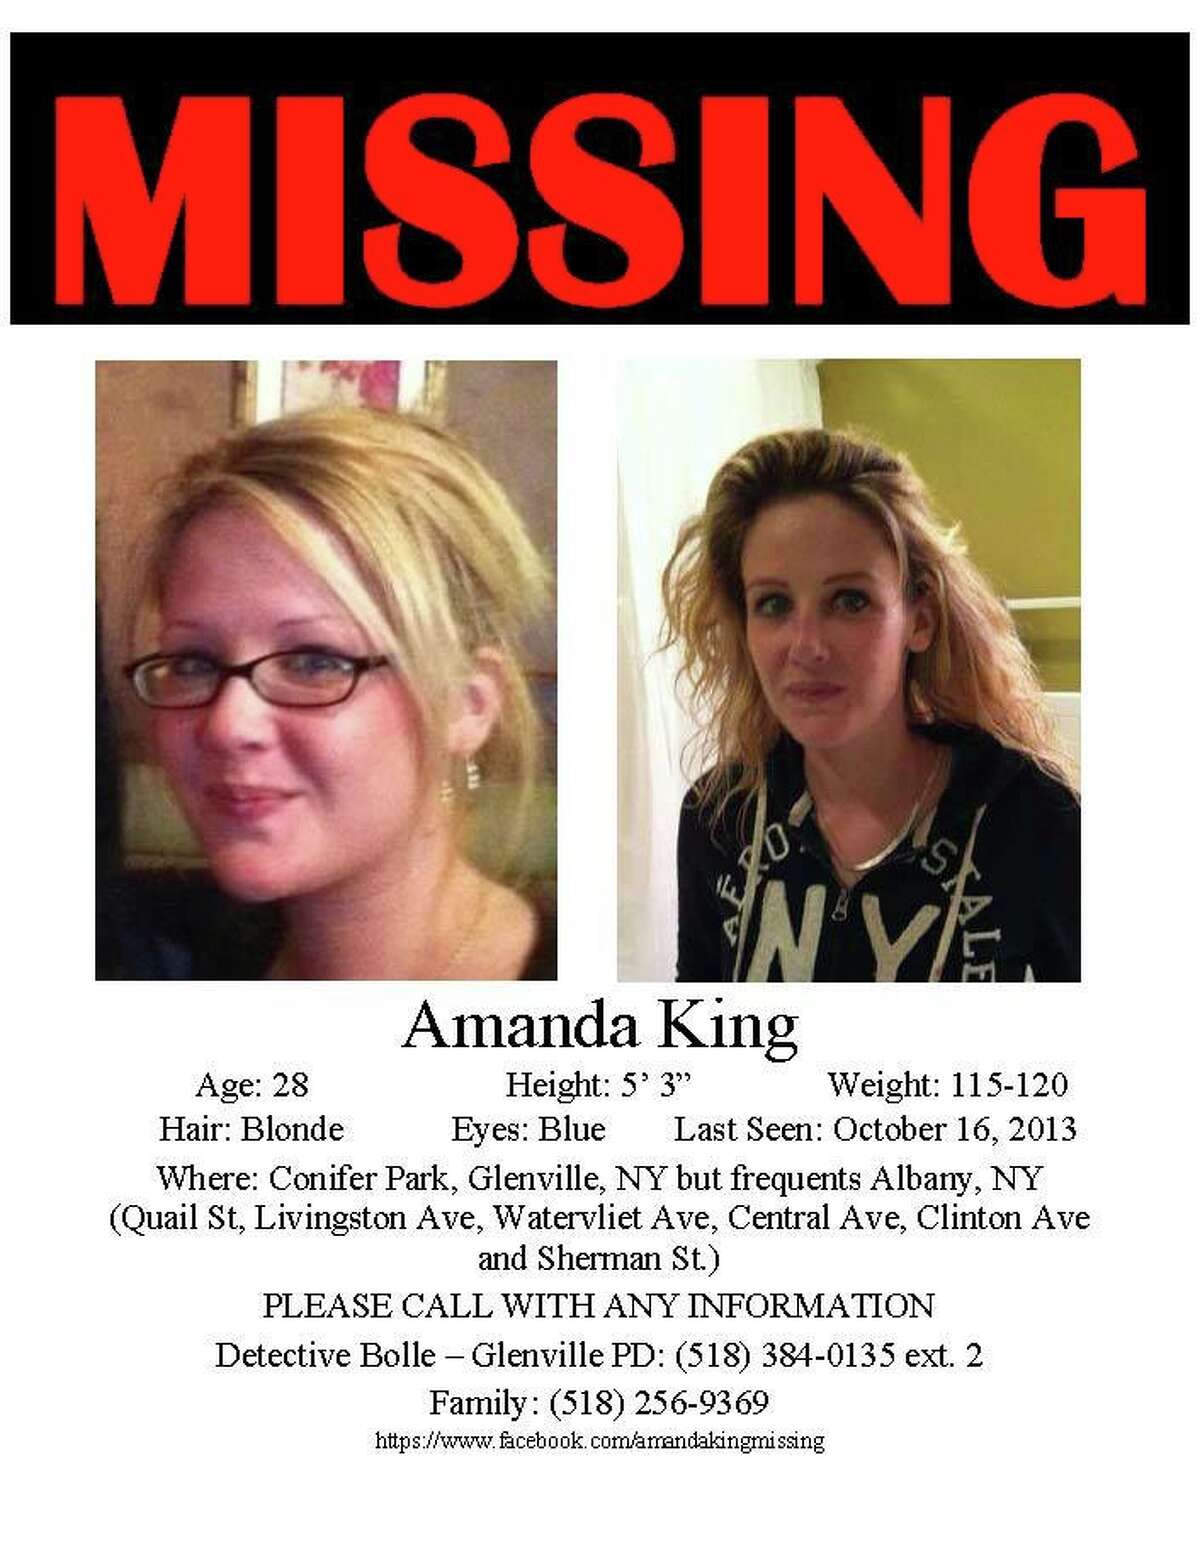 5 years later What happened to Amanda King?